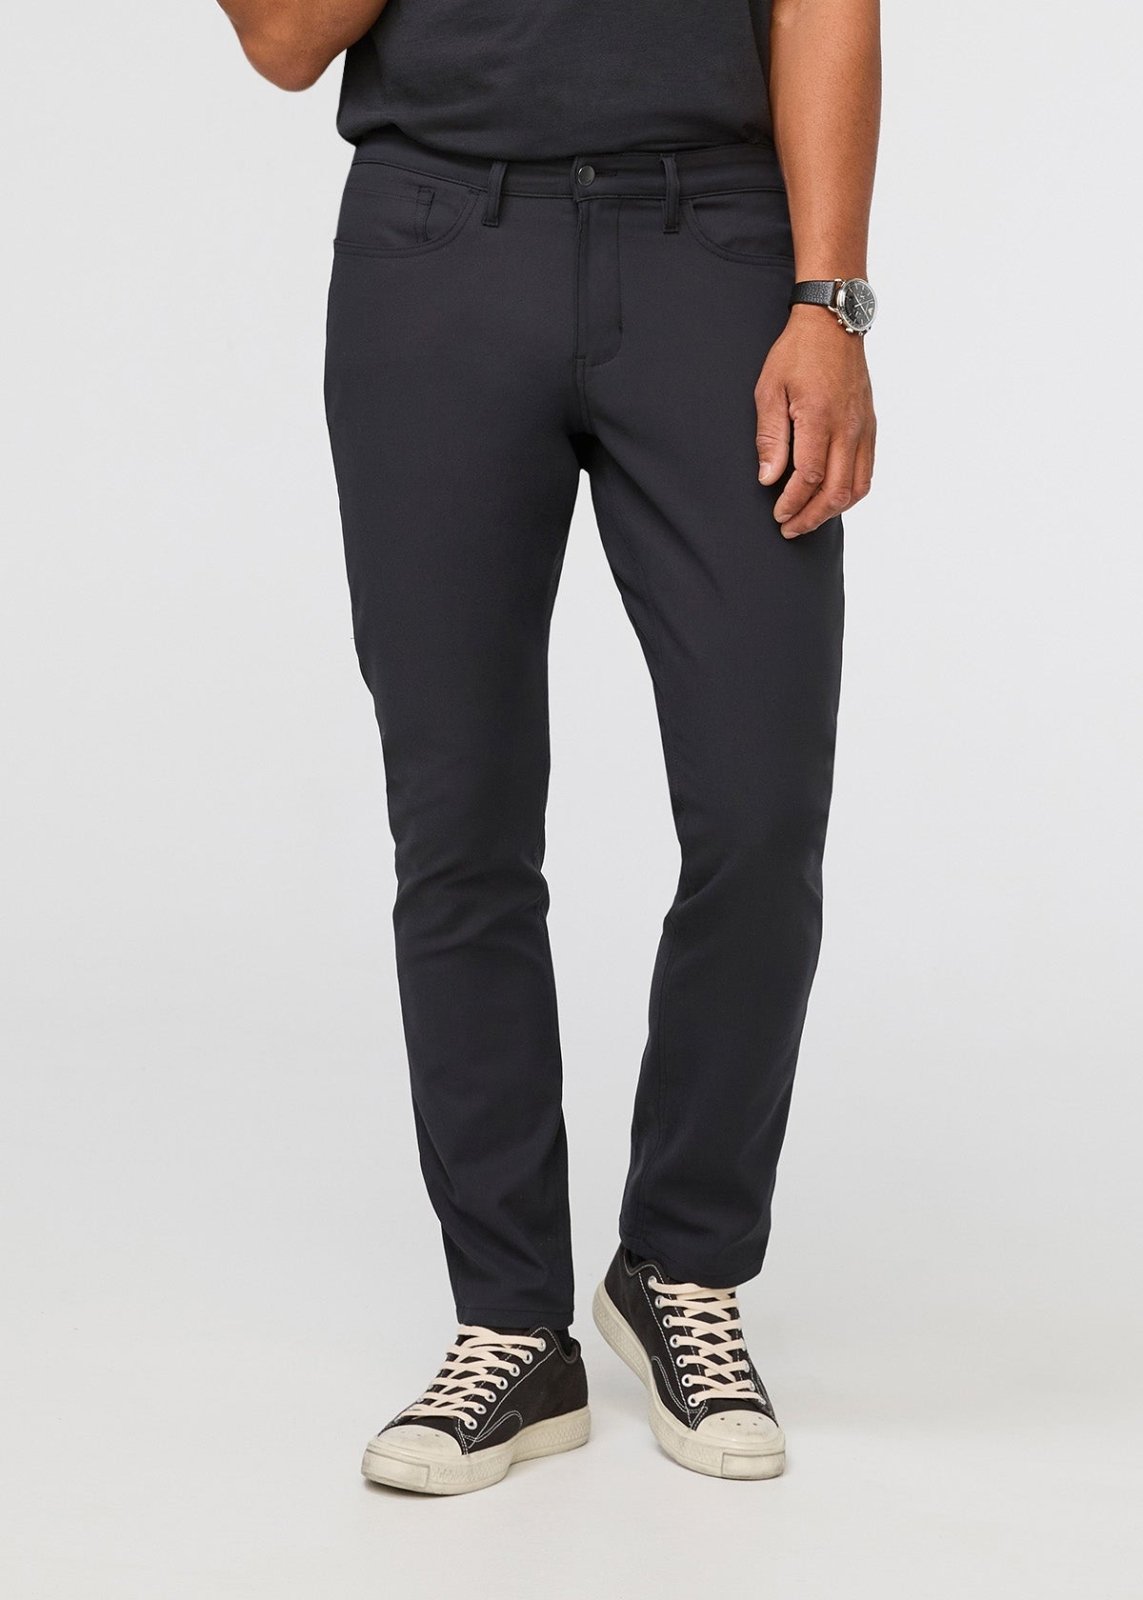 Difference Between Slim Fit, Tapered Fit & Relaxed Fit Trousers